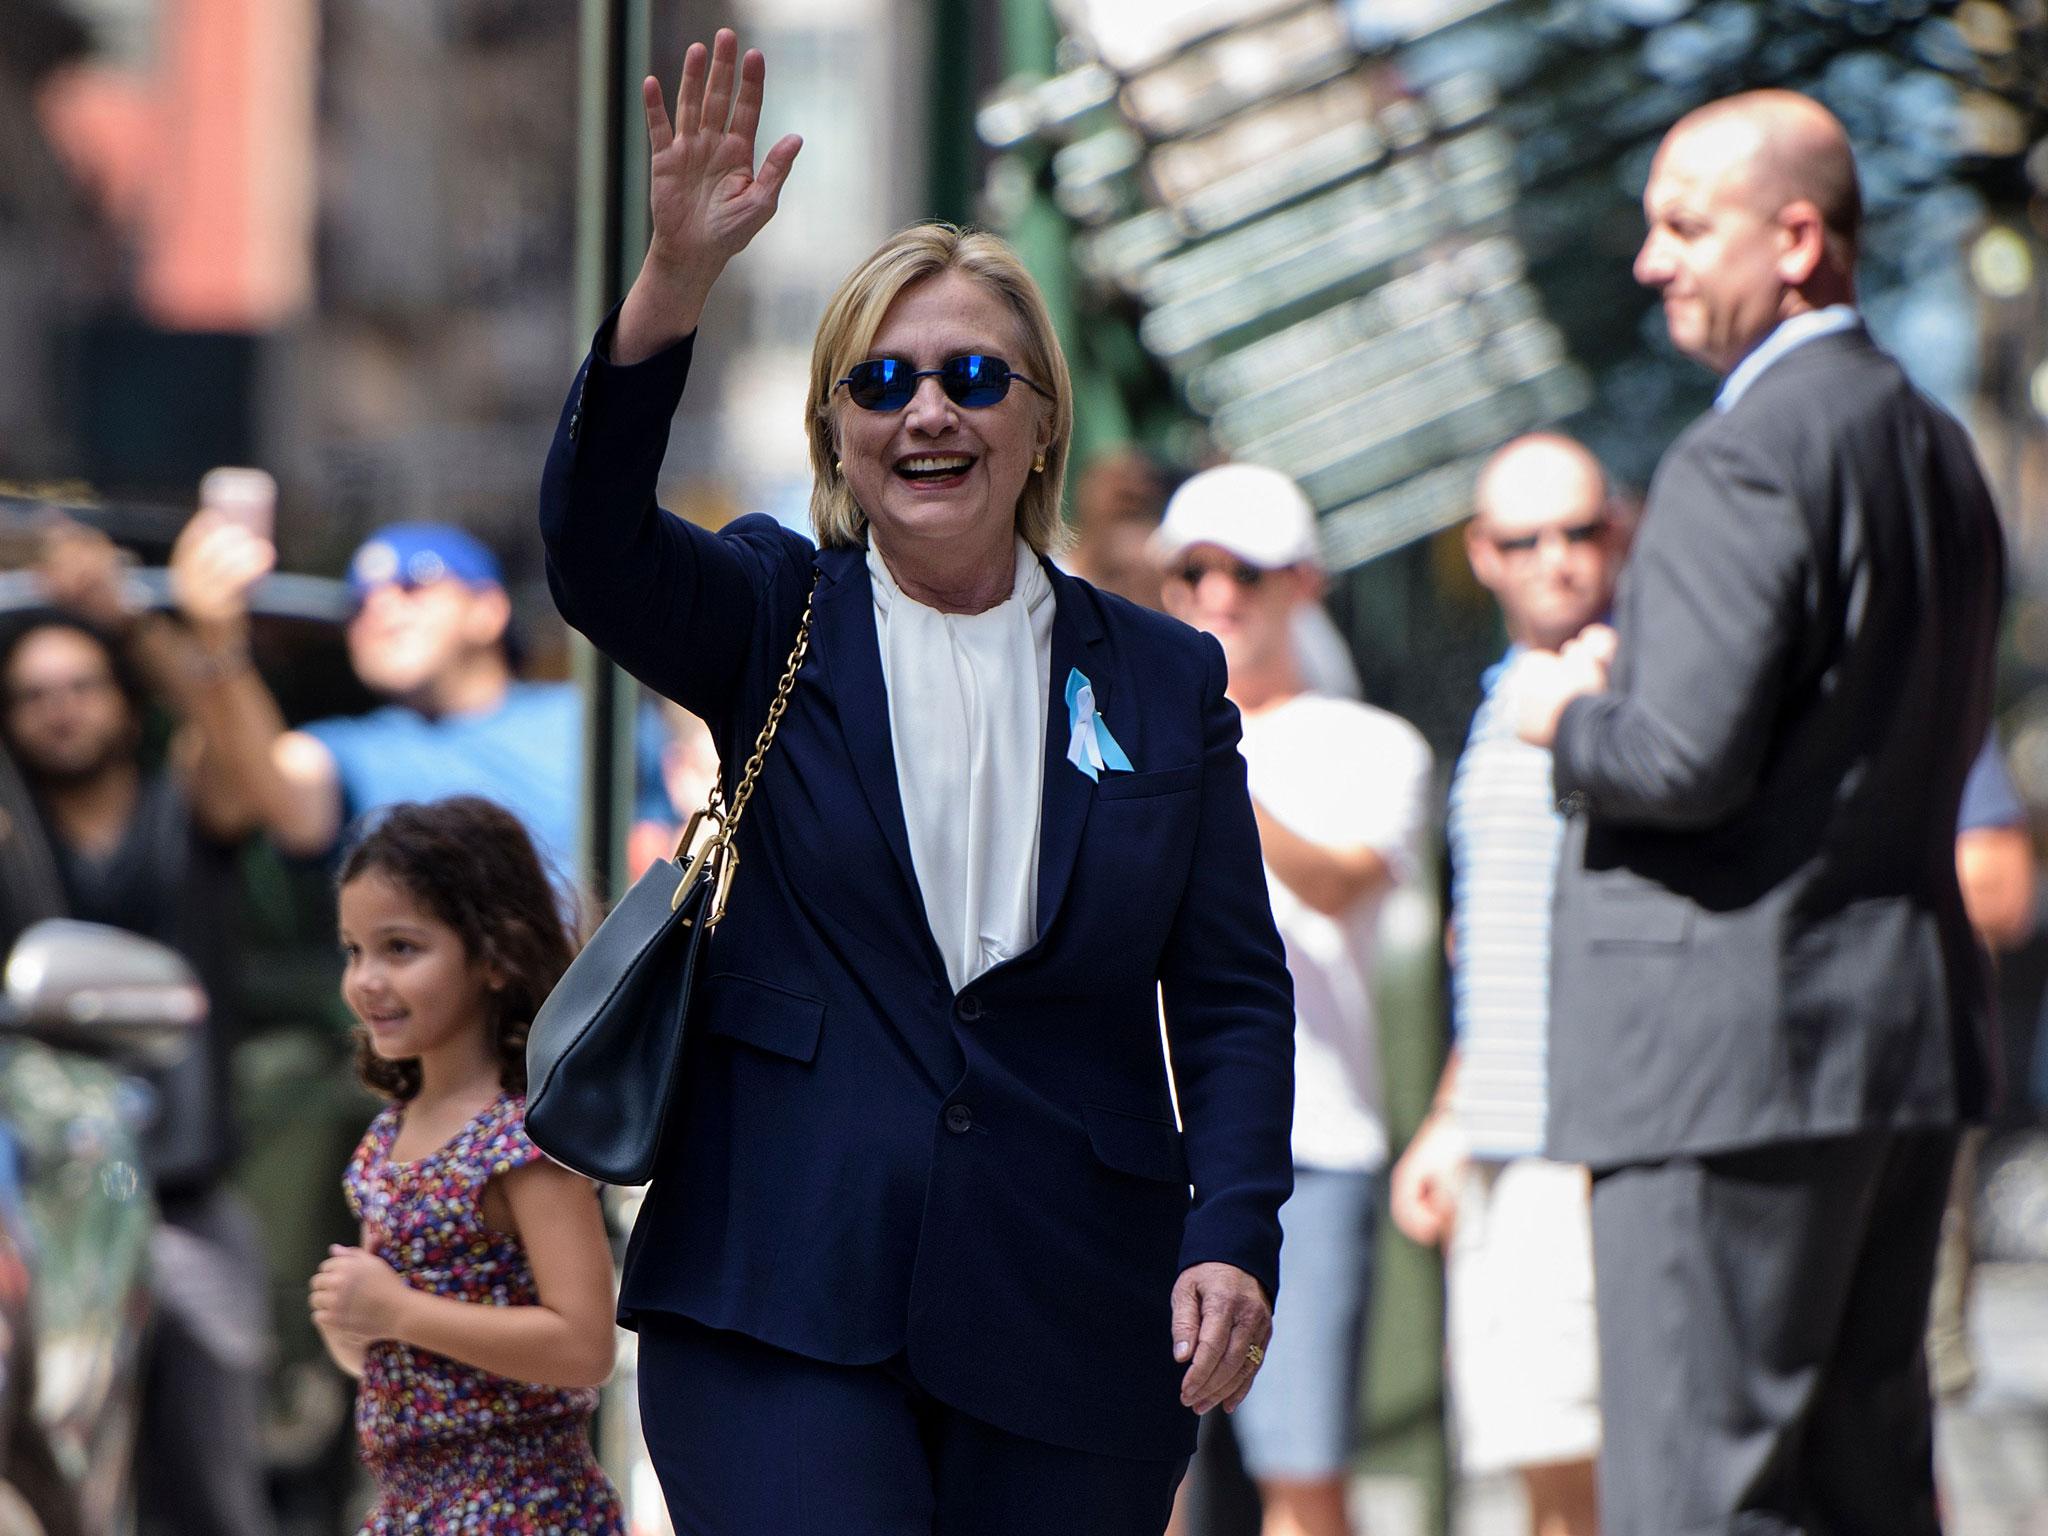 Ms Clinton was set to return to the campaign trail on Thursday with a rally in North Carolina